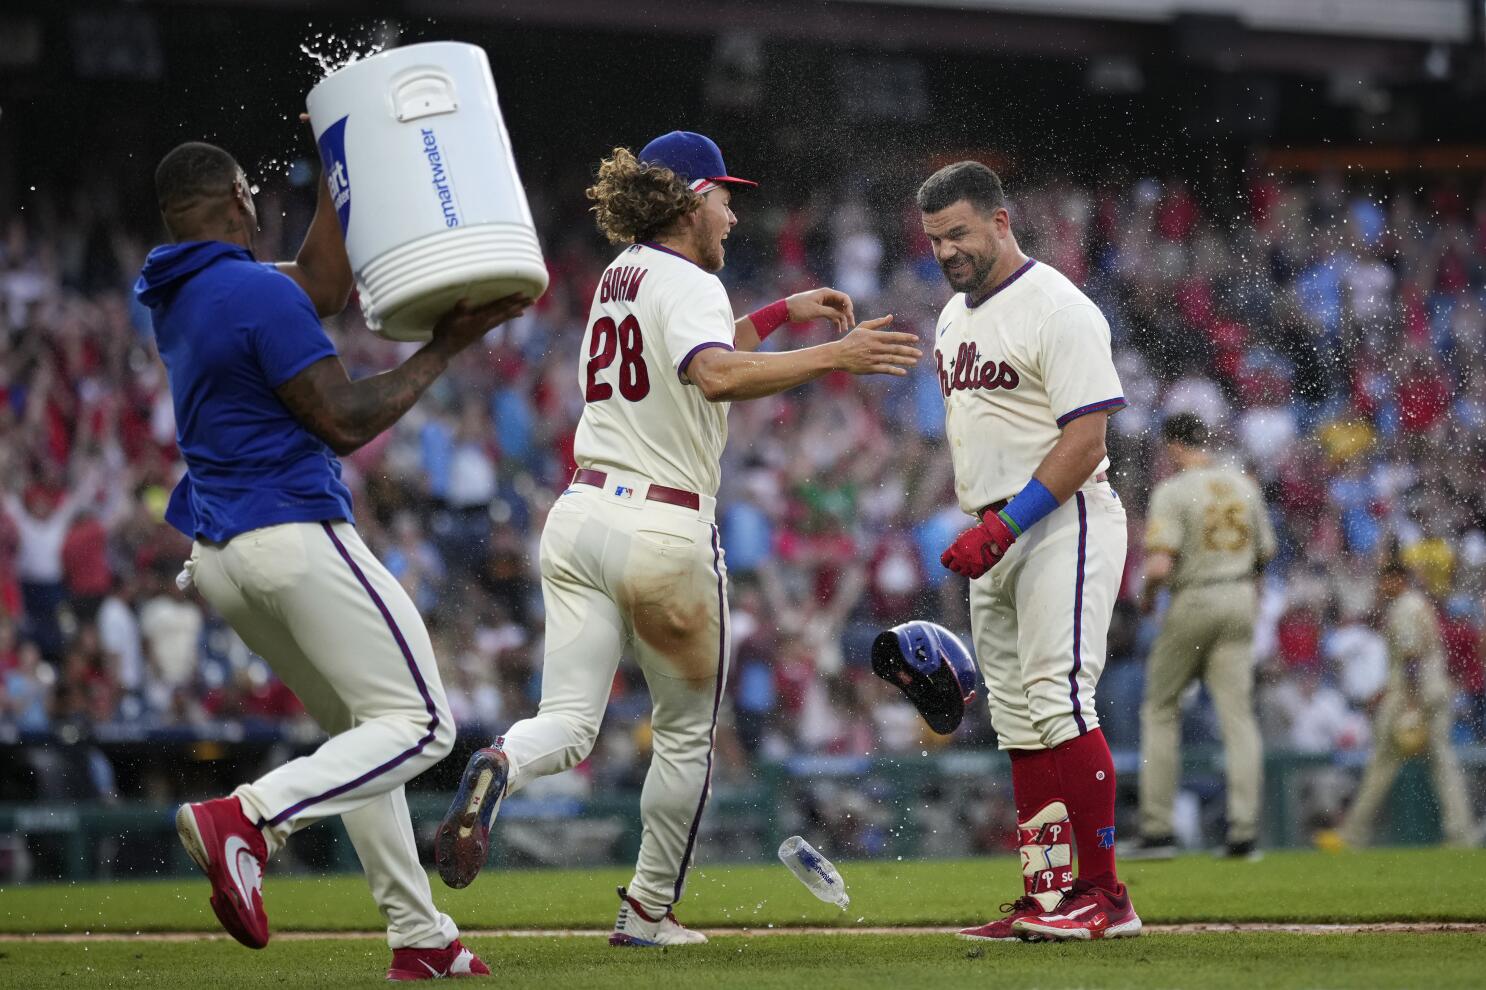 Harper, Thomson ejected, Phillies 5 game winning streak snapped